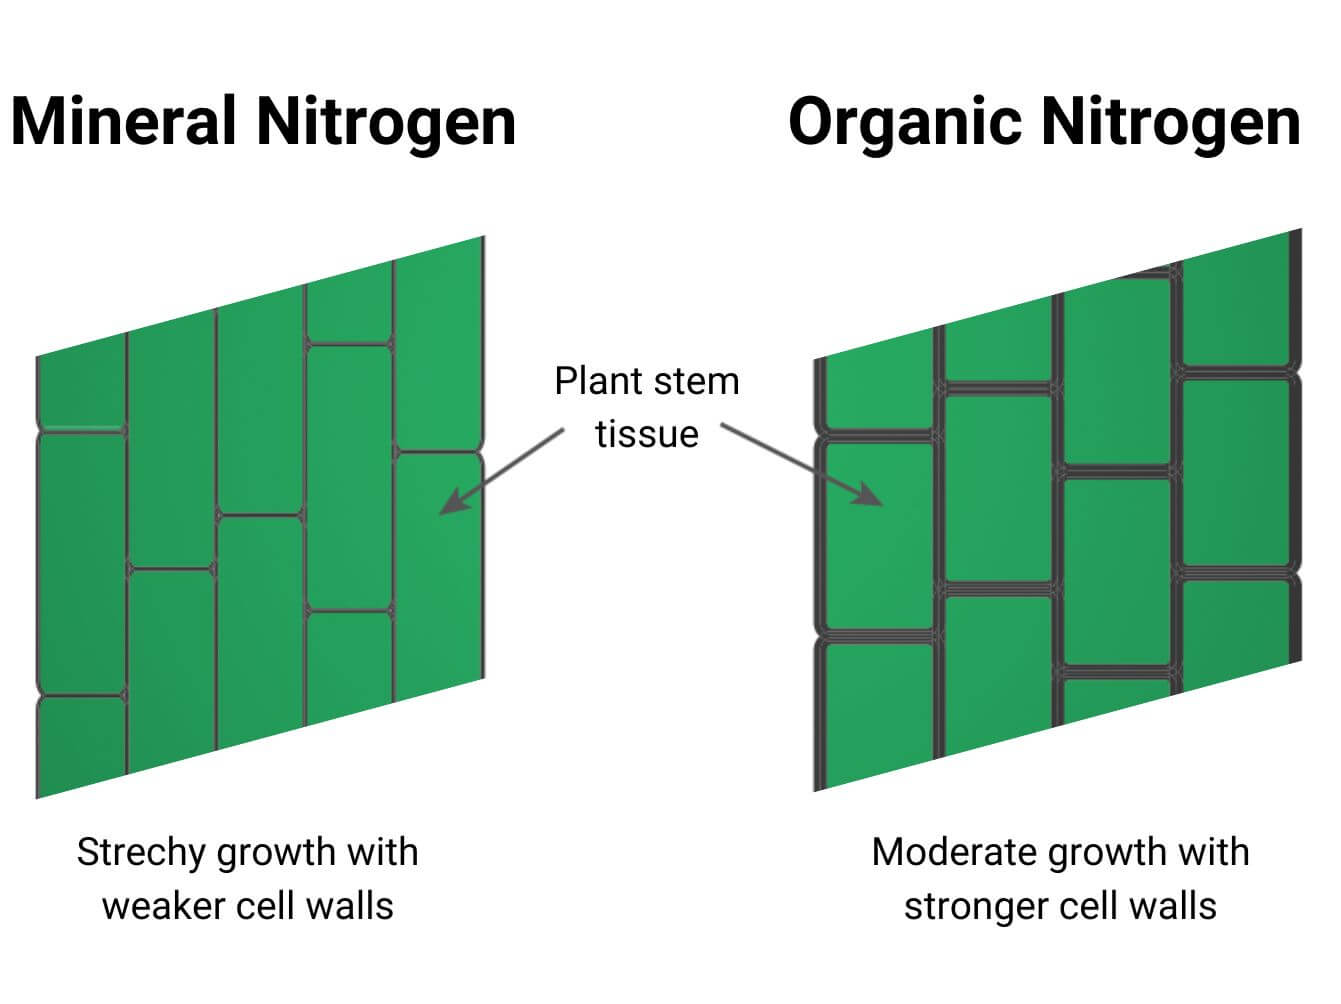 Impact of mineral versus organic nitrogen on the structure of plant cells